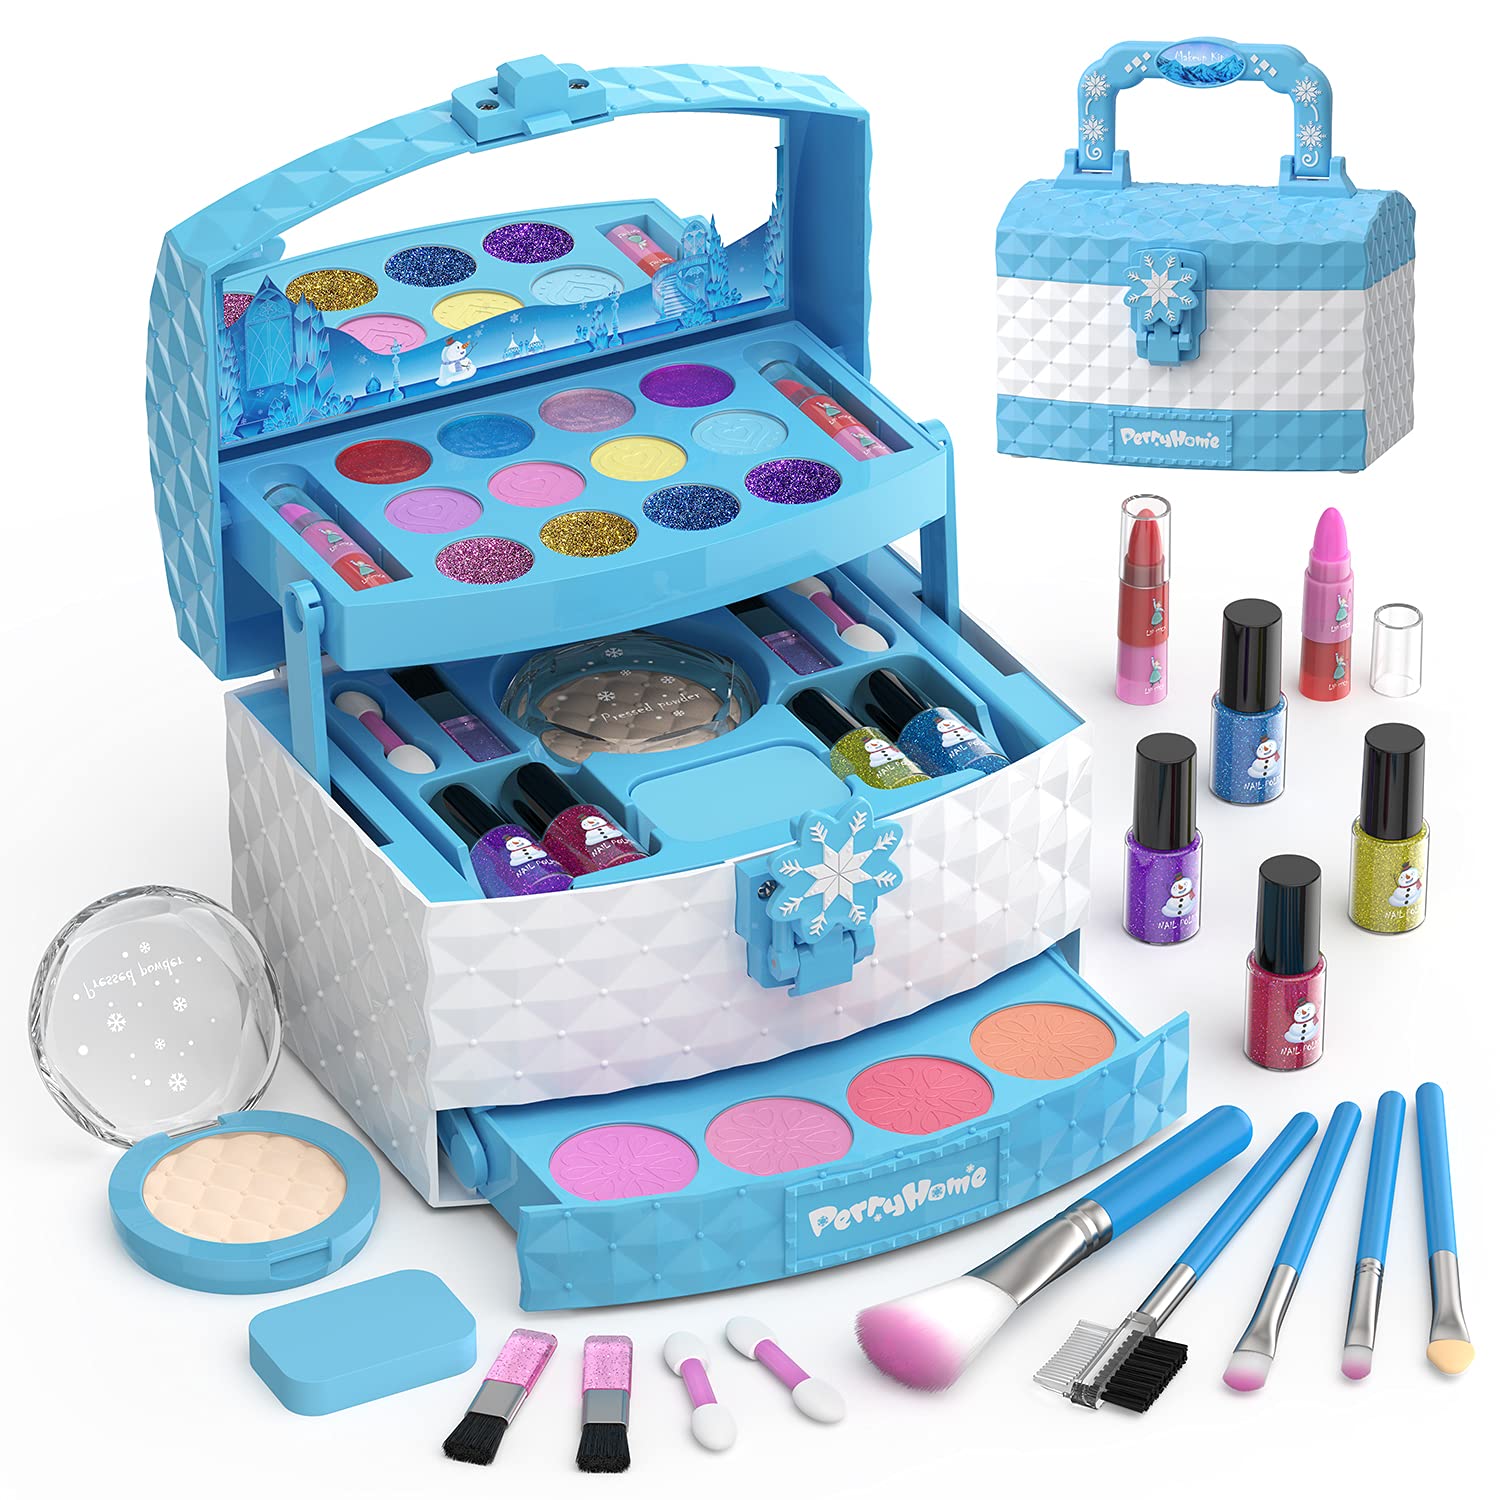 PERRYHOME Kids Makeup Kit for Girl 35 Pcs Pretend Play Makeup Set, Washable Makeup Kit Real Cosmetic Toy Beauty Set with Box, Safe & Non-Toxic Frozen Makeup Set for 5-12 Years Old Kids Birthday Gift